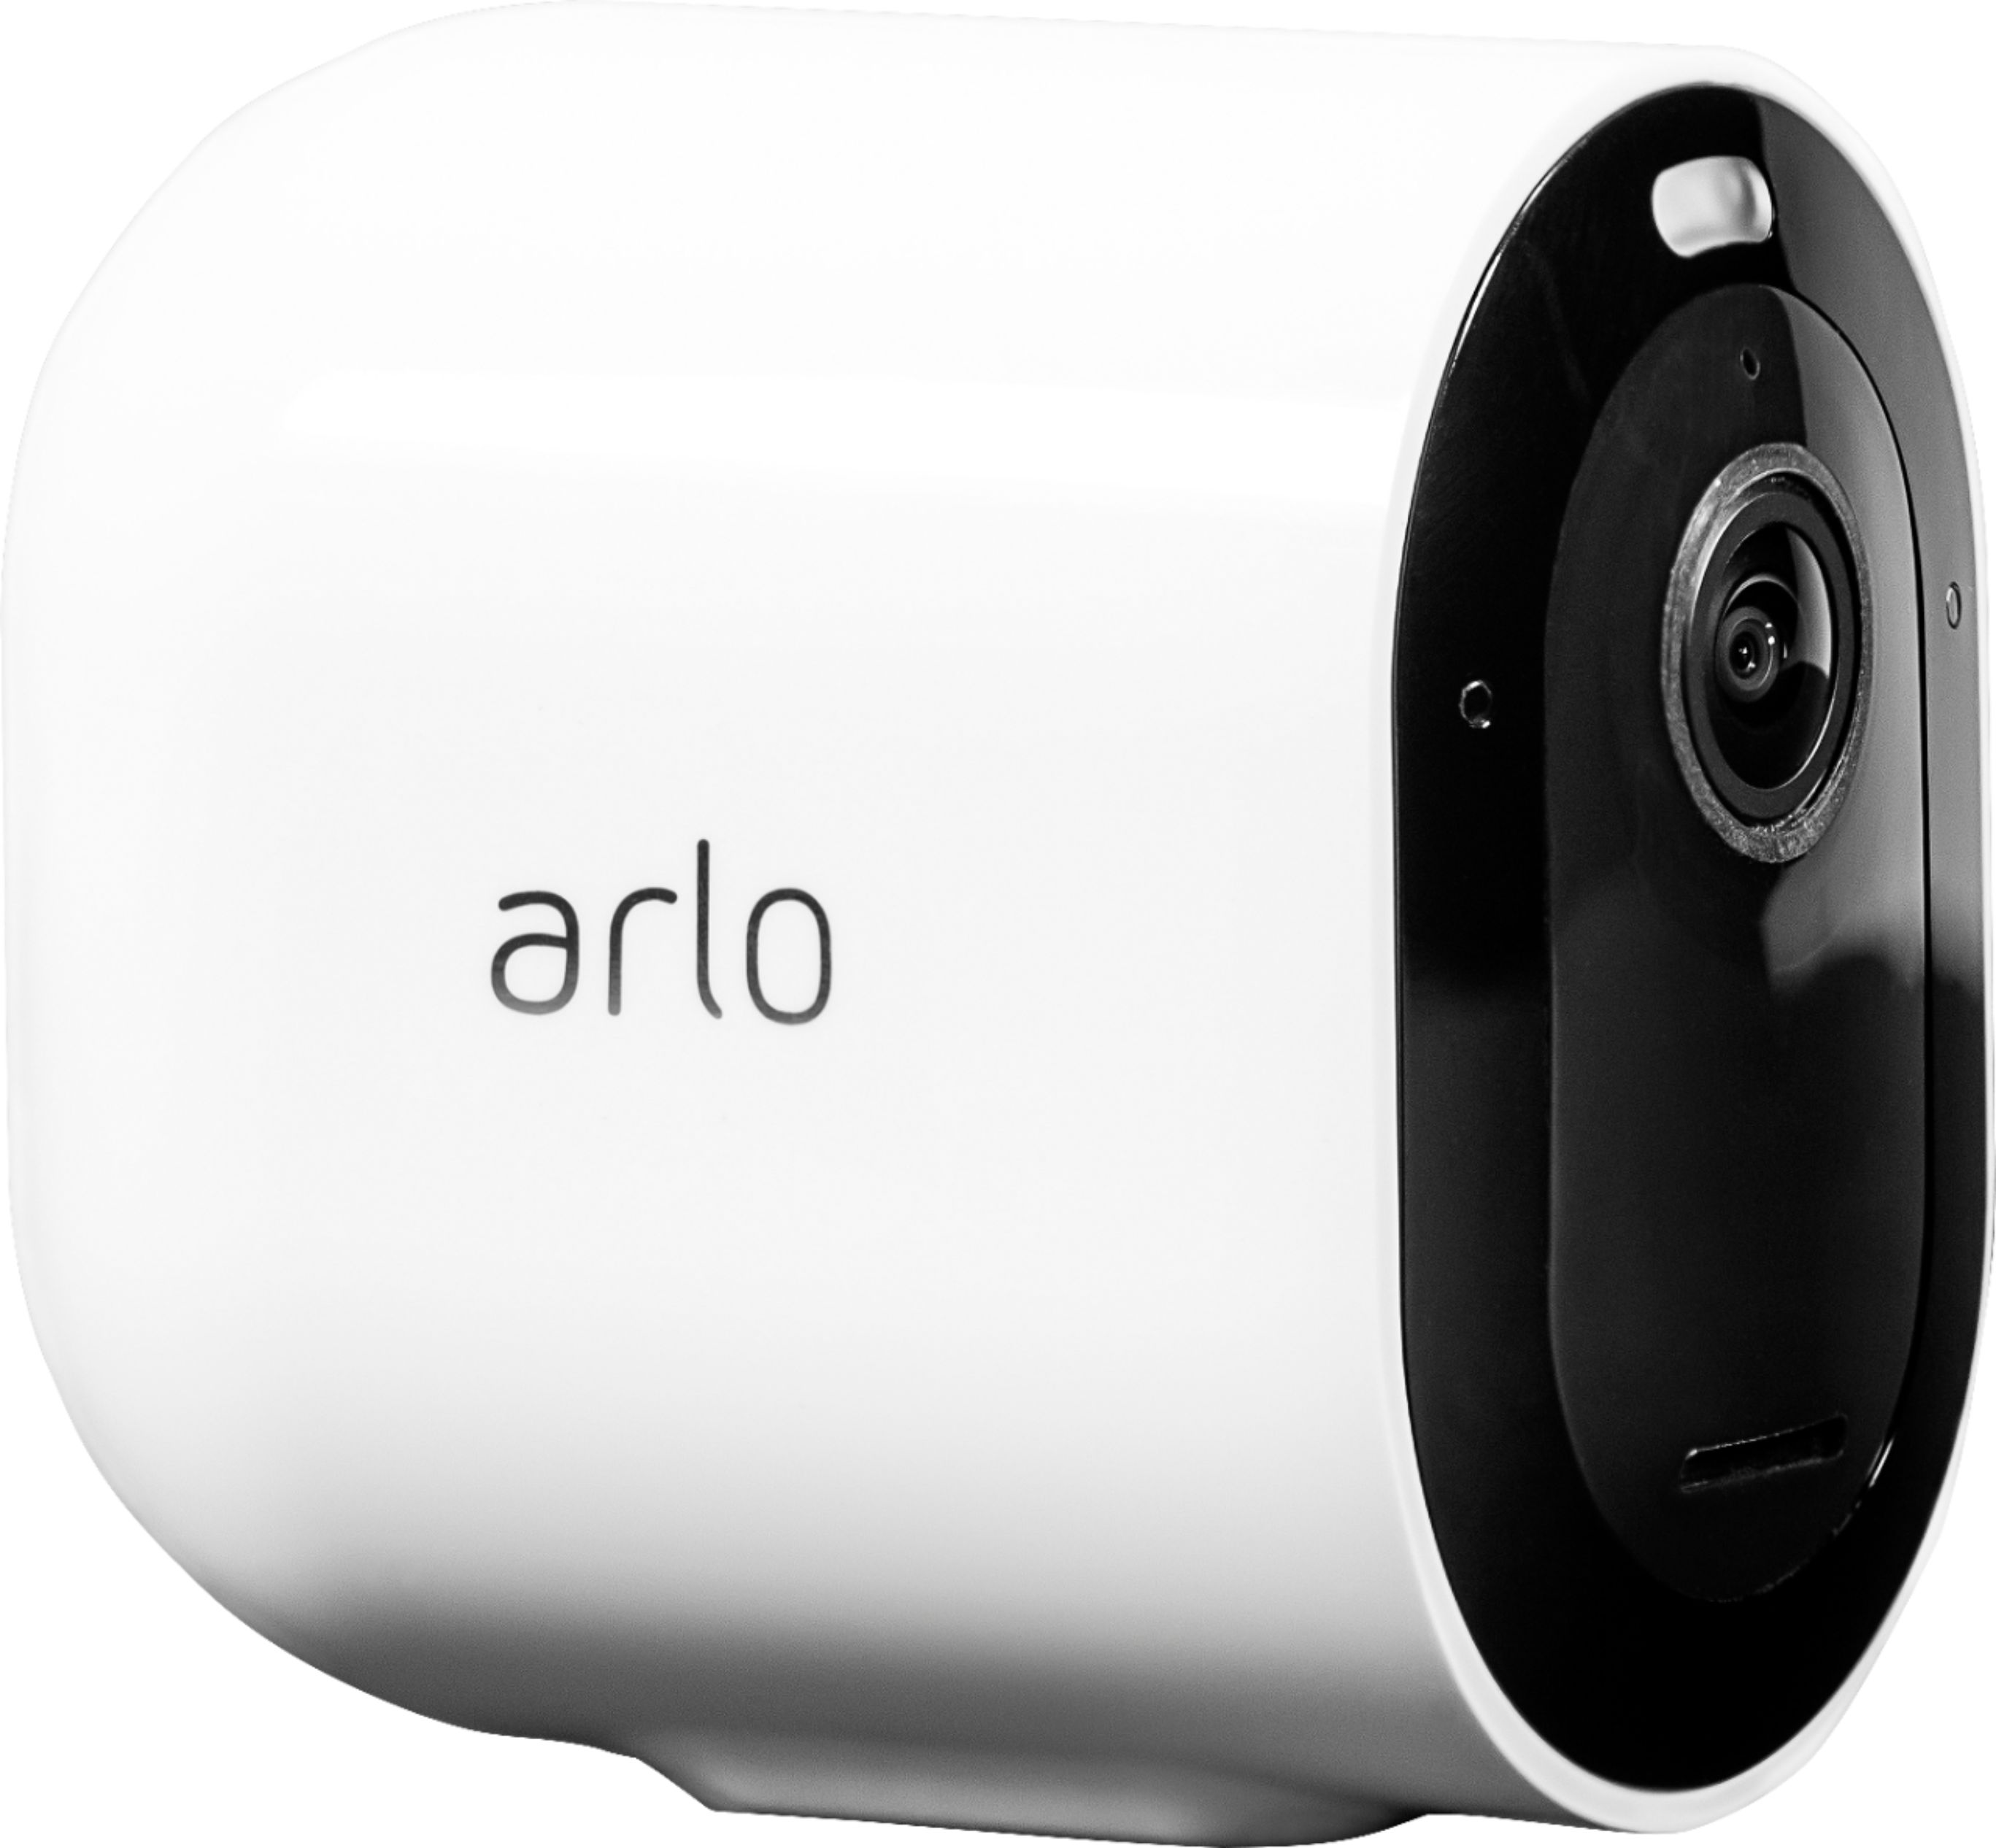 Arlo - Pro 3 2-Camera Indoor/Outdoor Wire-Free 2K HDR Security Camera System - White